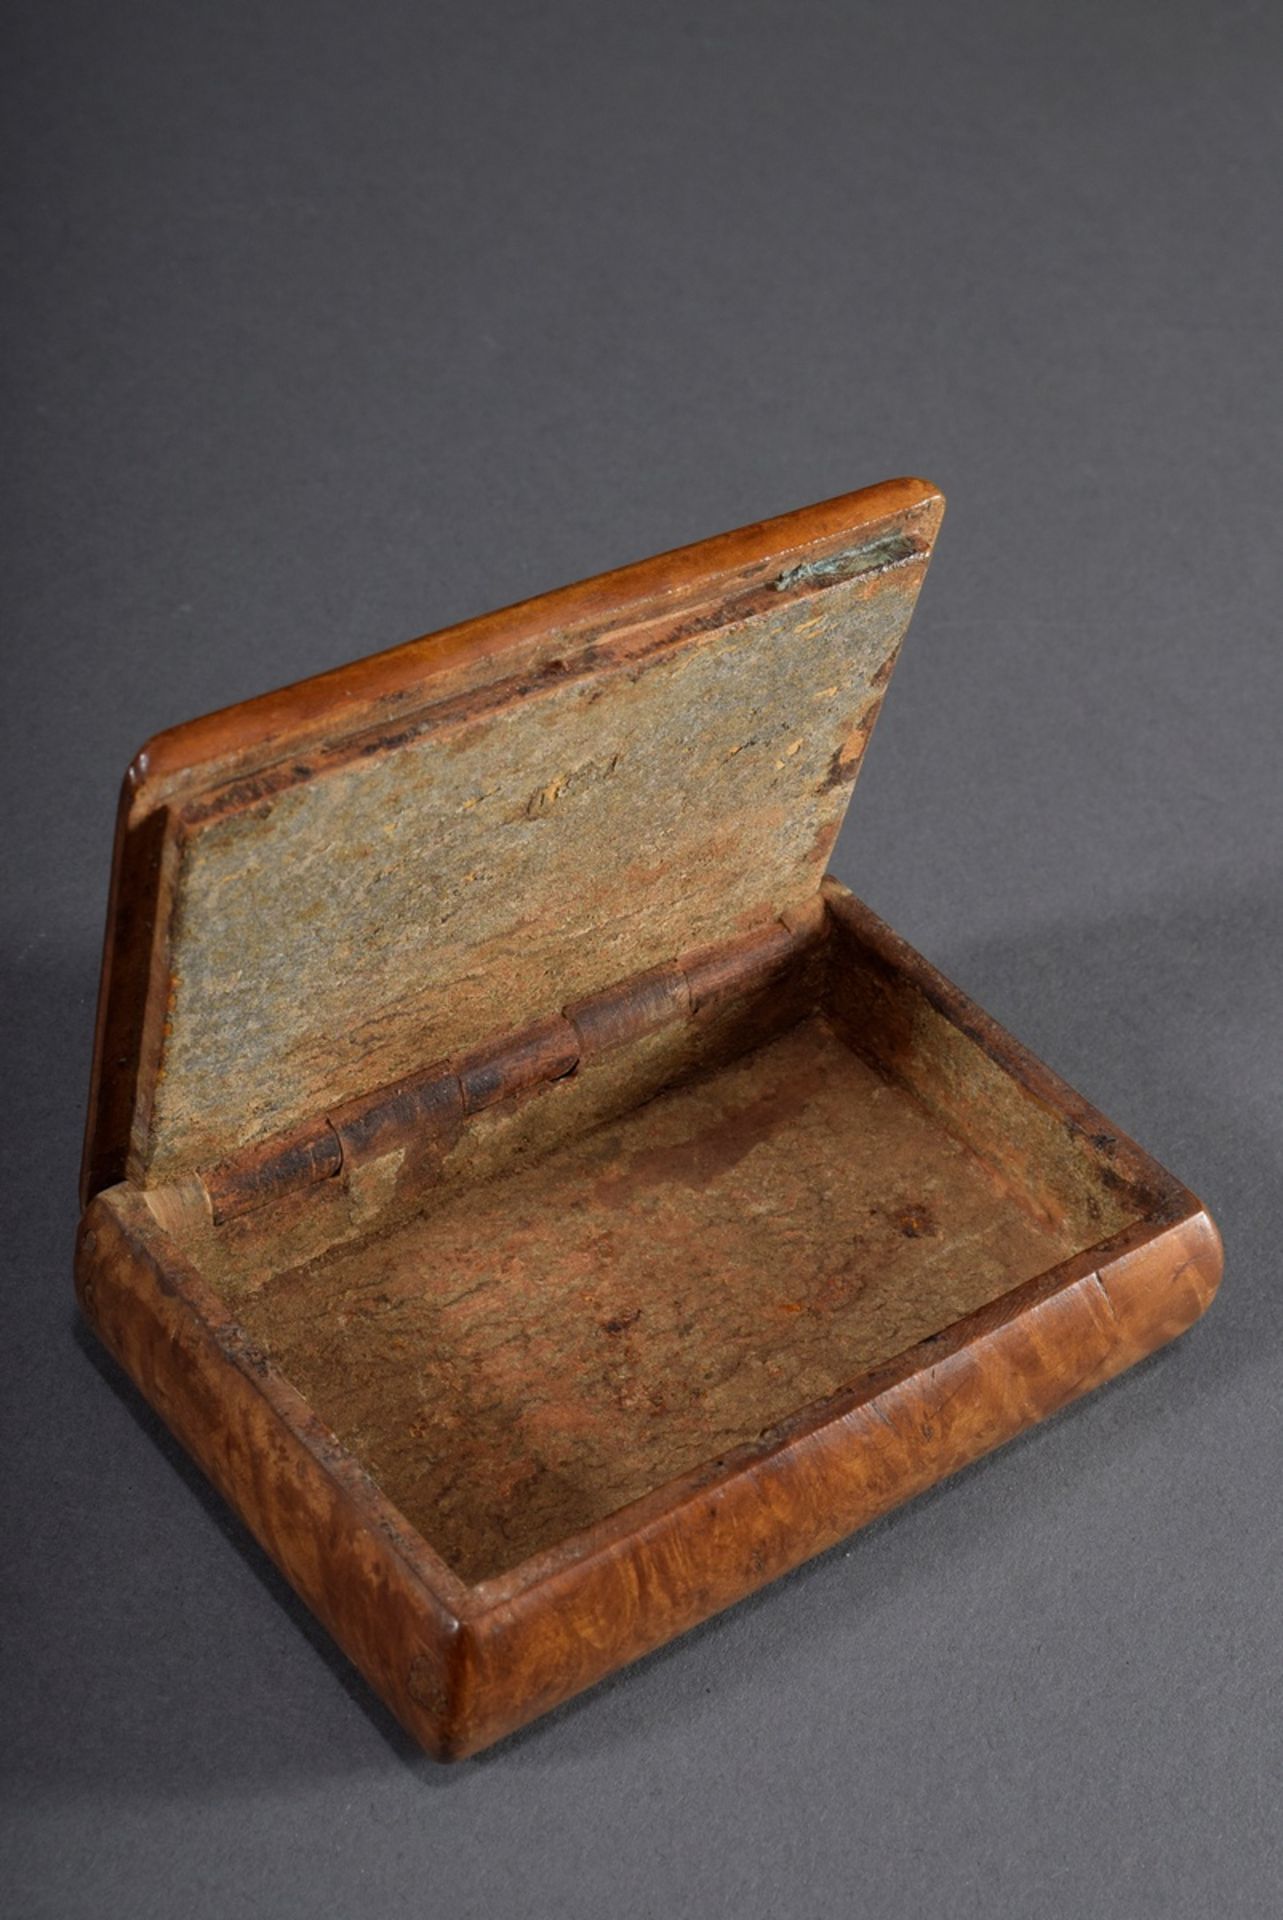 Wurzelholz Schnupftabakdose mit geschnitztem Rel | Burl wood snuff box with carved relief in the li - Image 5 of 8